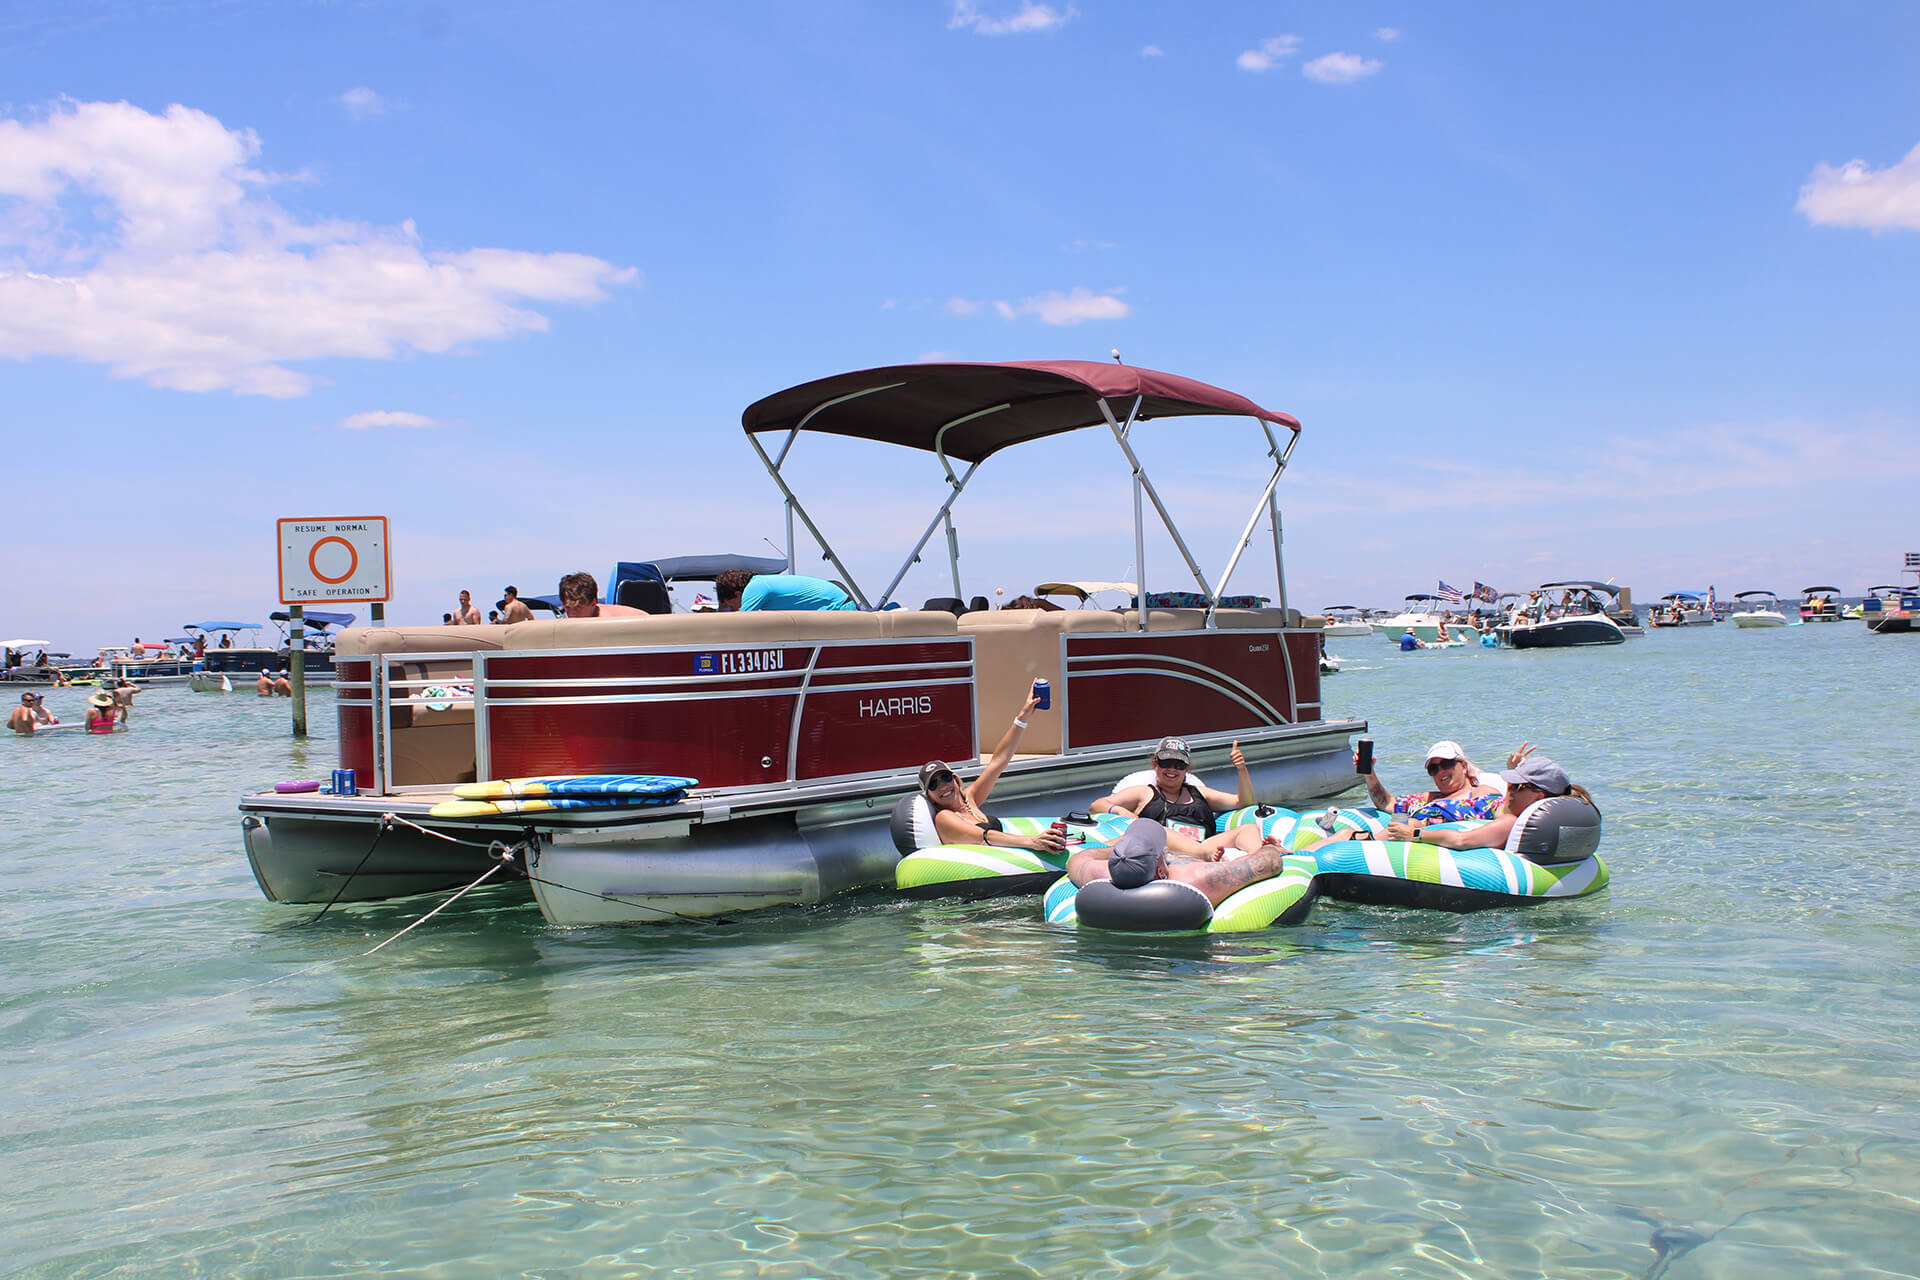 Just down from the beach, there's a place to rent paddle boats